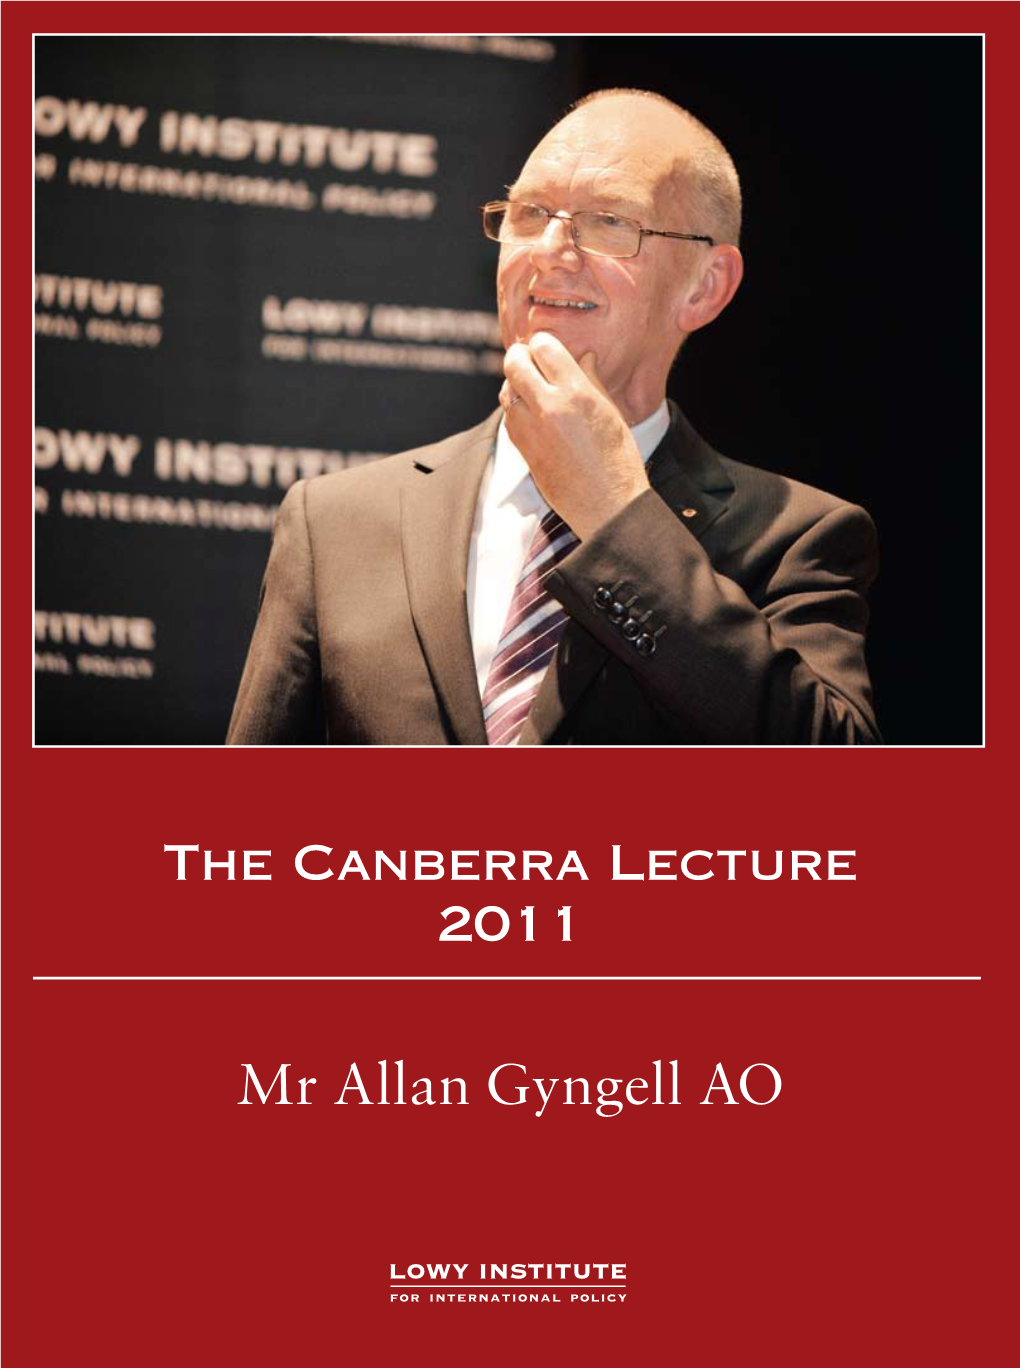 Mr Allan Gyngell AO the CANBERRA LECTURE